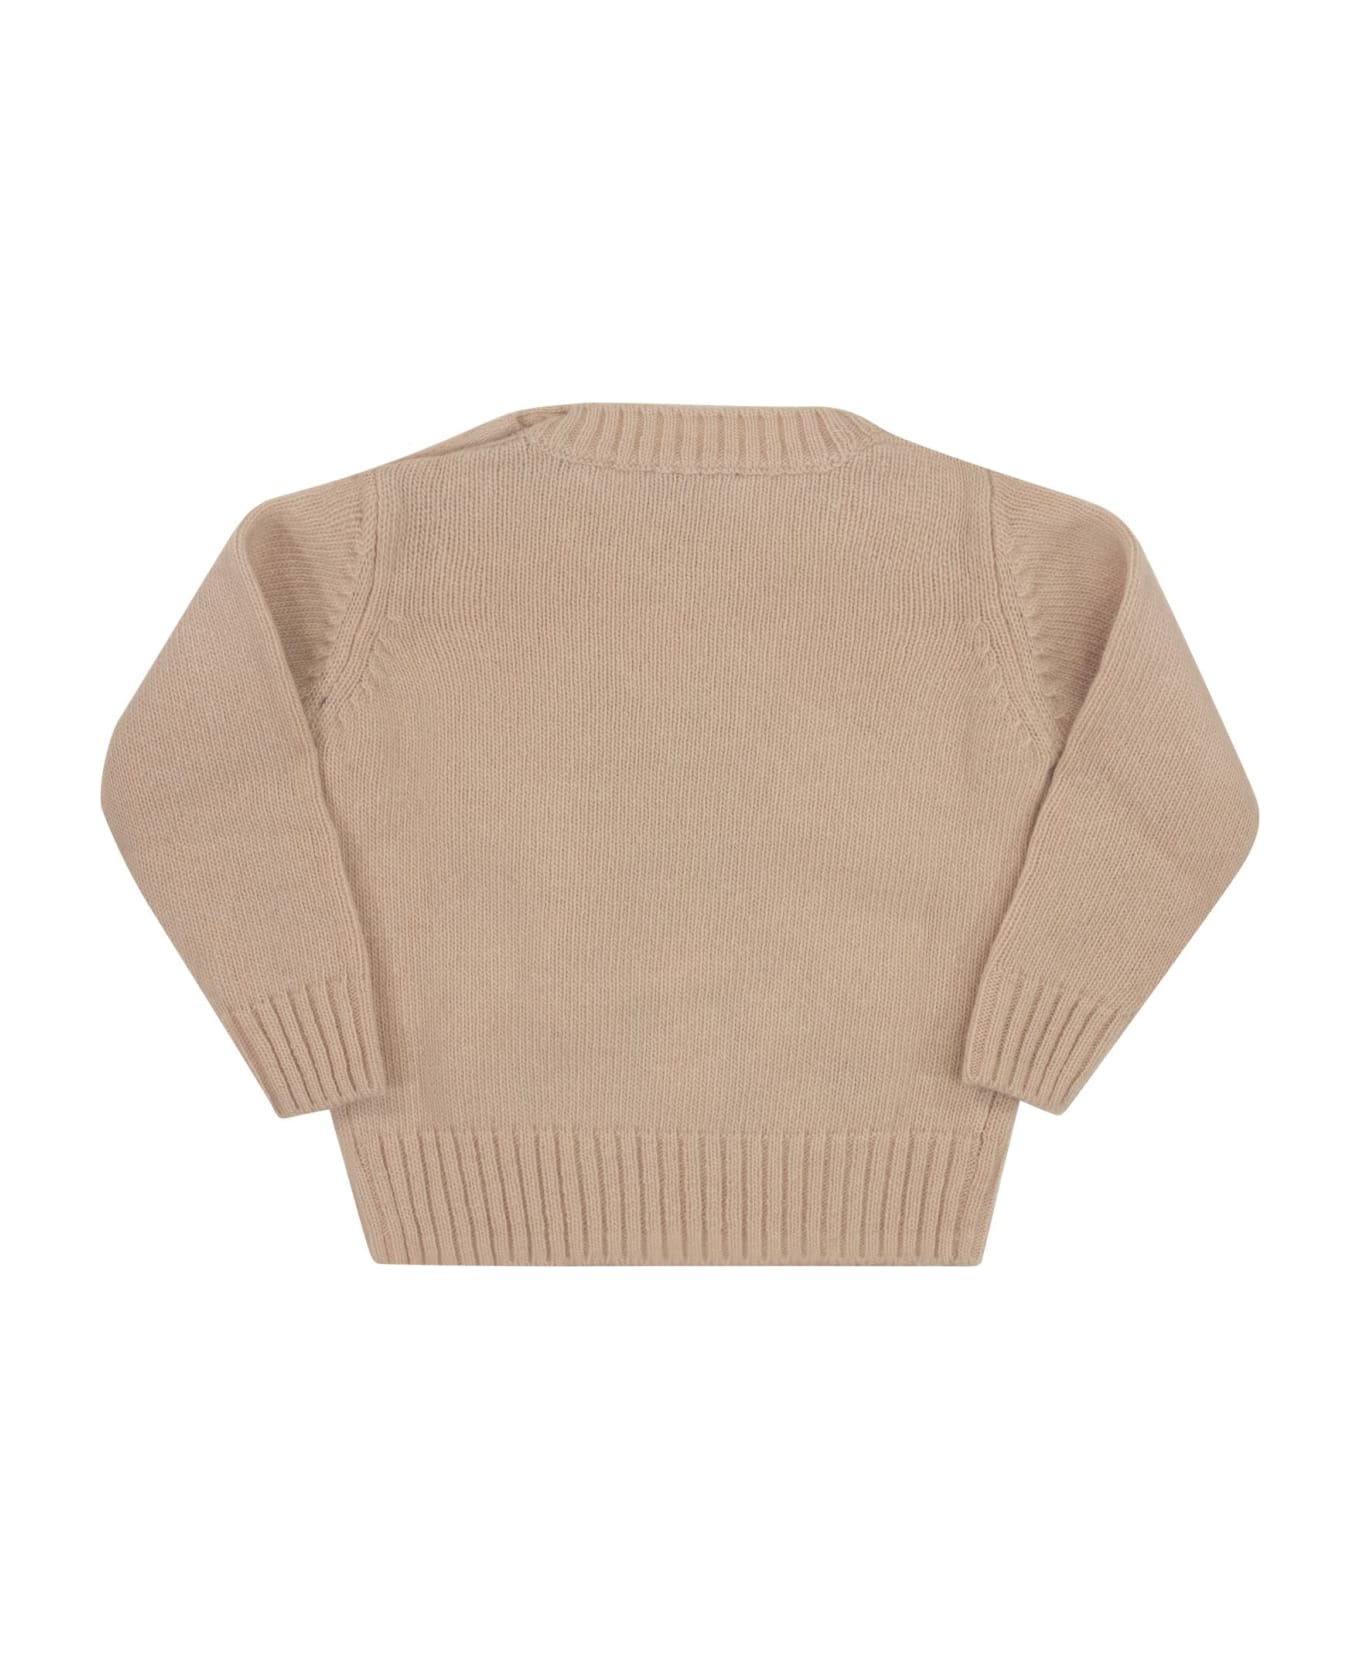 Il Gufo Sweater With Embroidered Pony Skin - Pink/beige ニットウェア＆スウェットシャツ